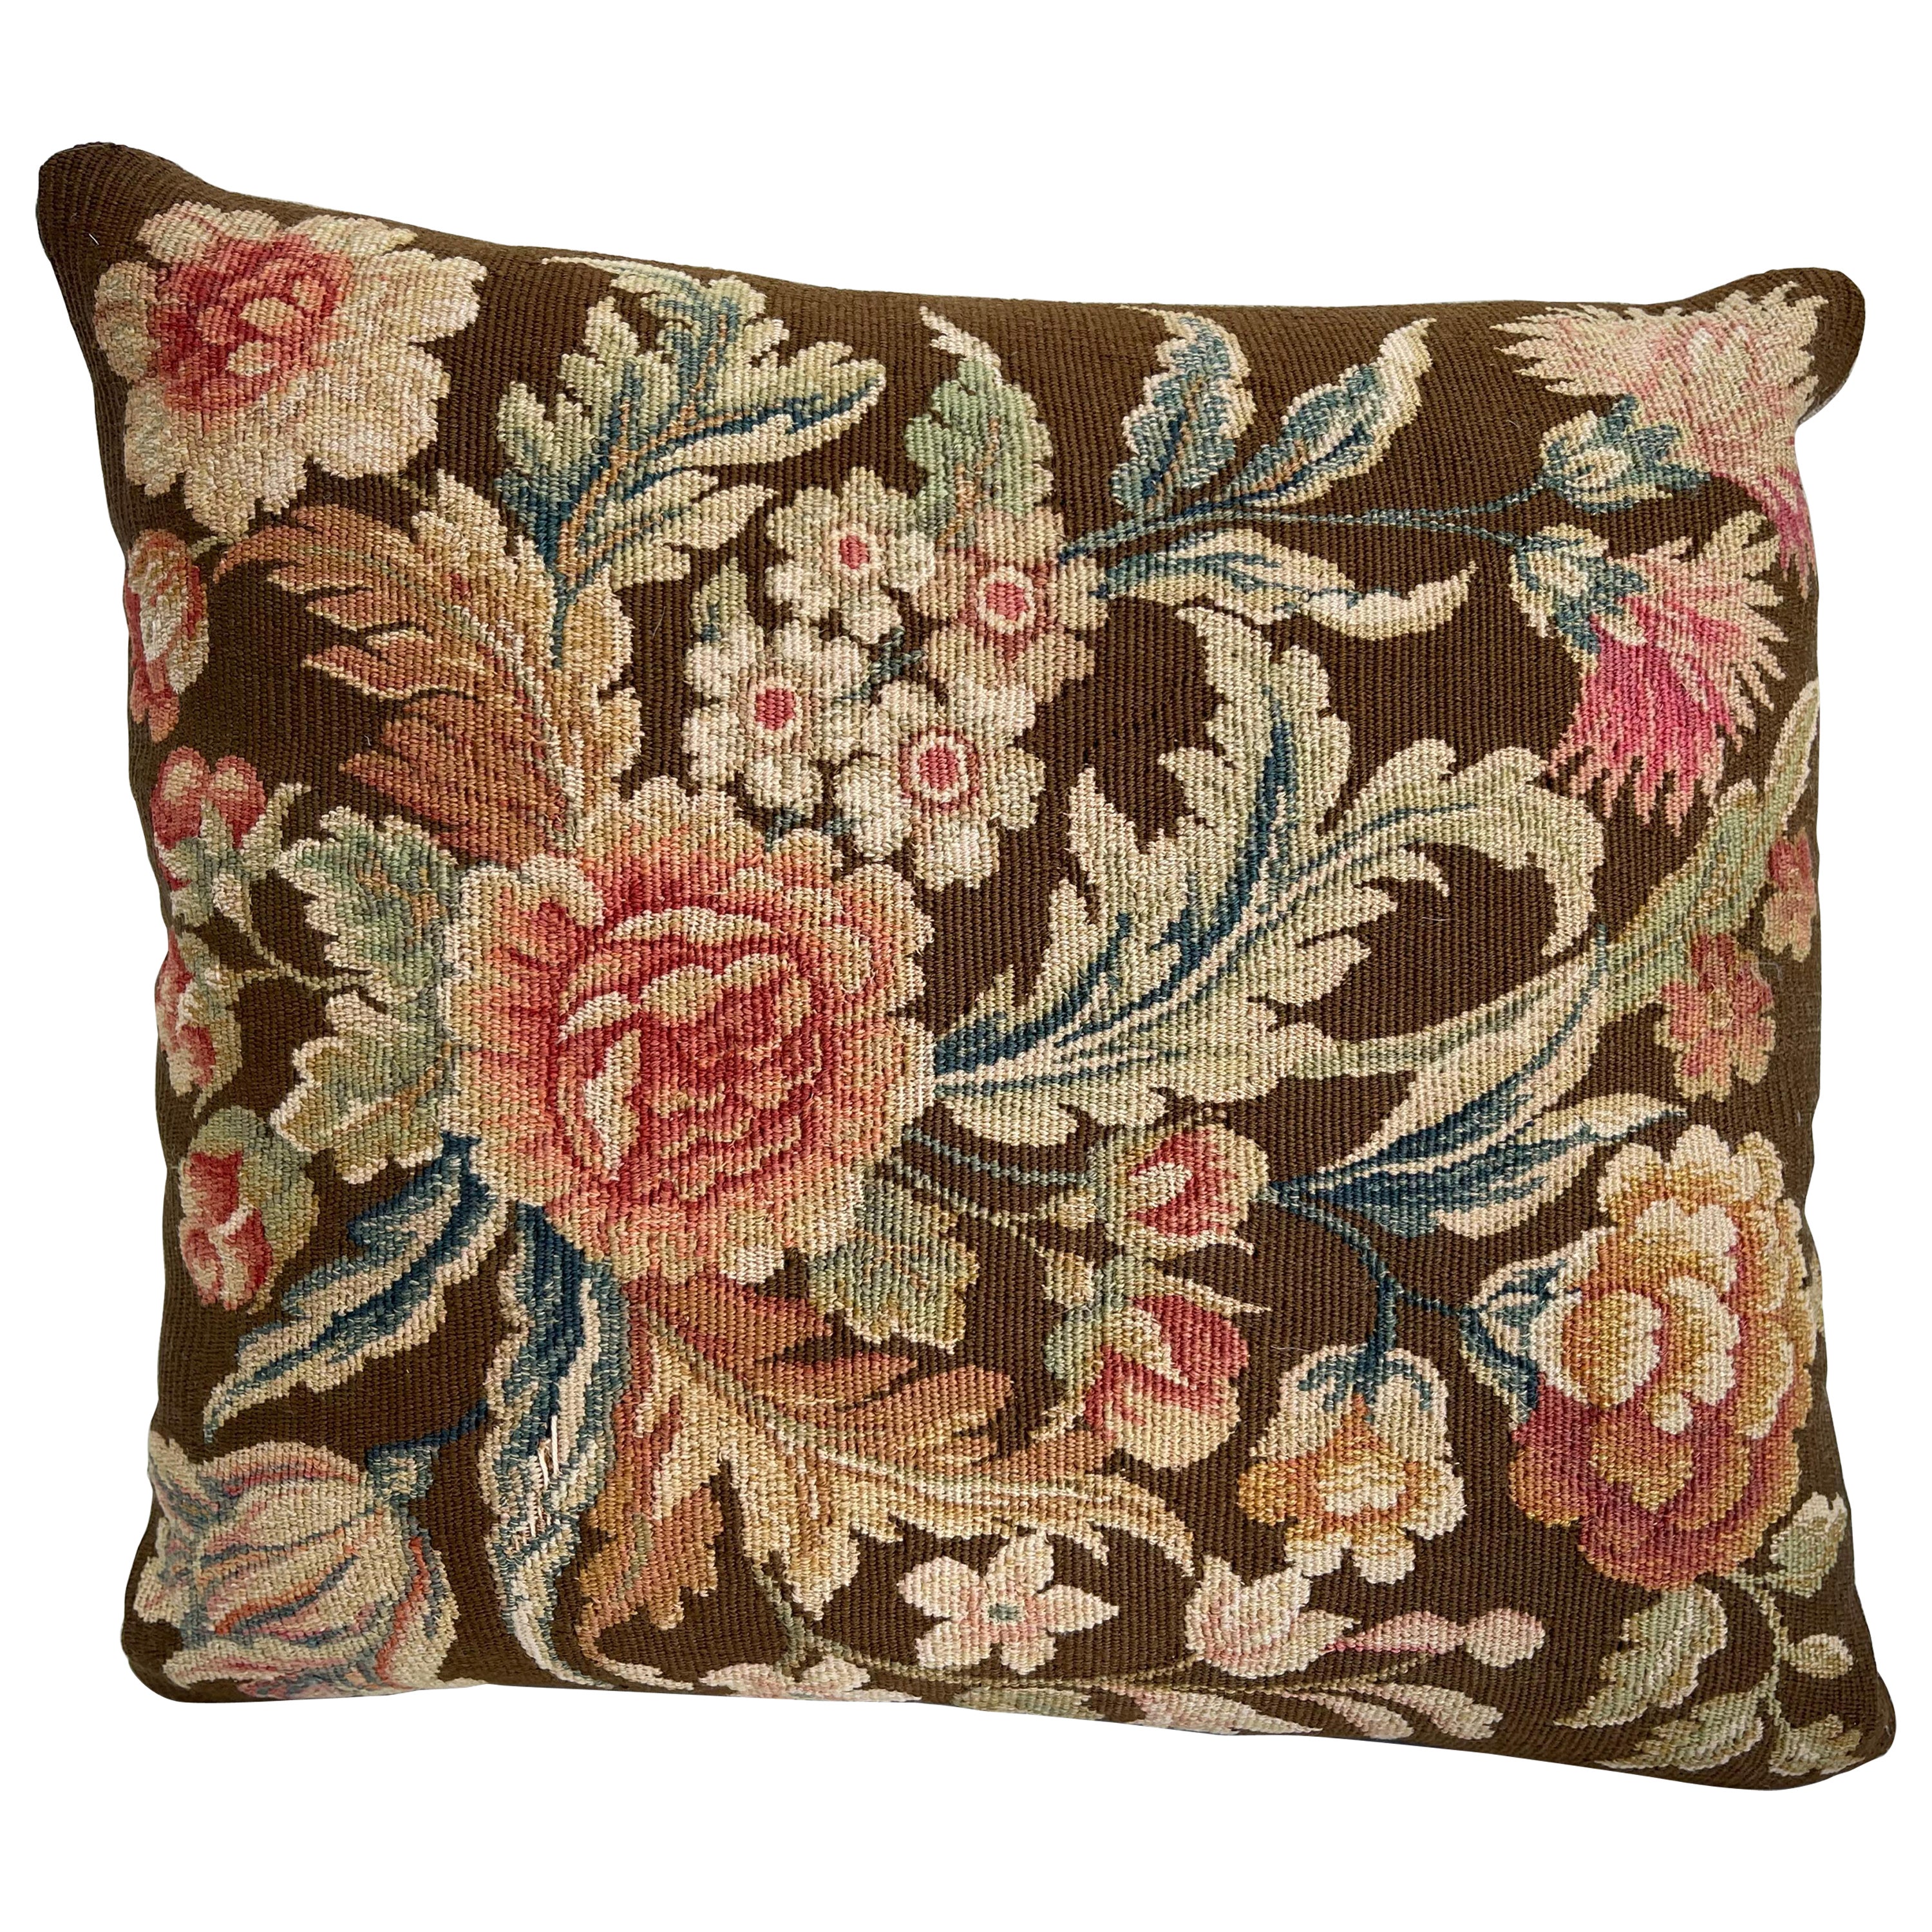 19th Century French Tapestry Pillow - 13" X 11" For Sale